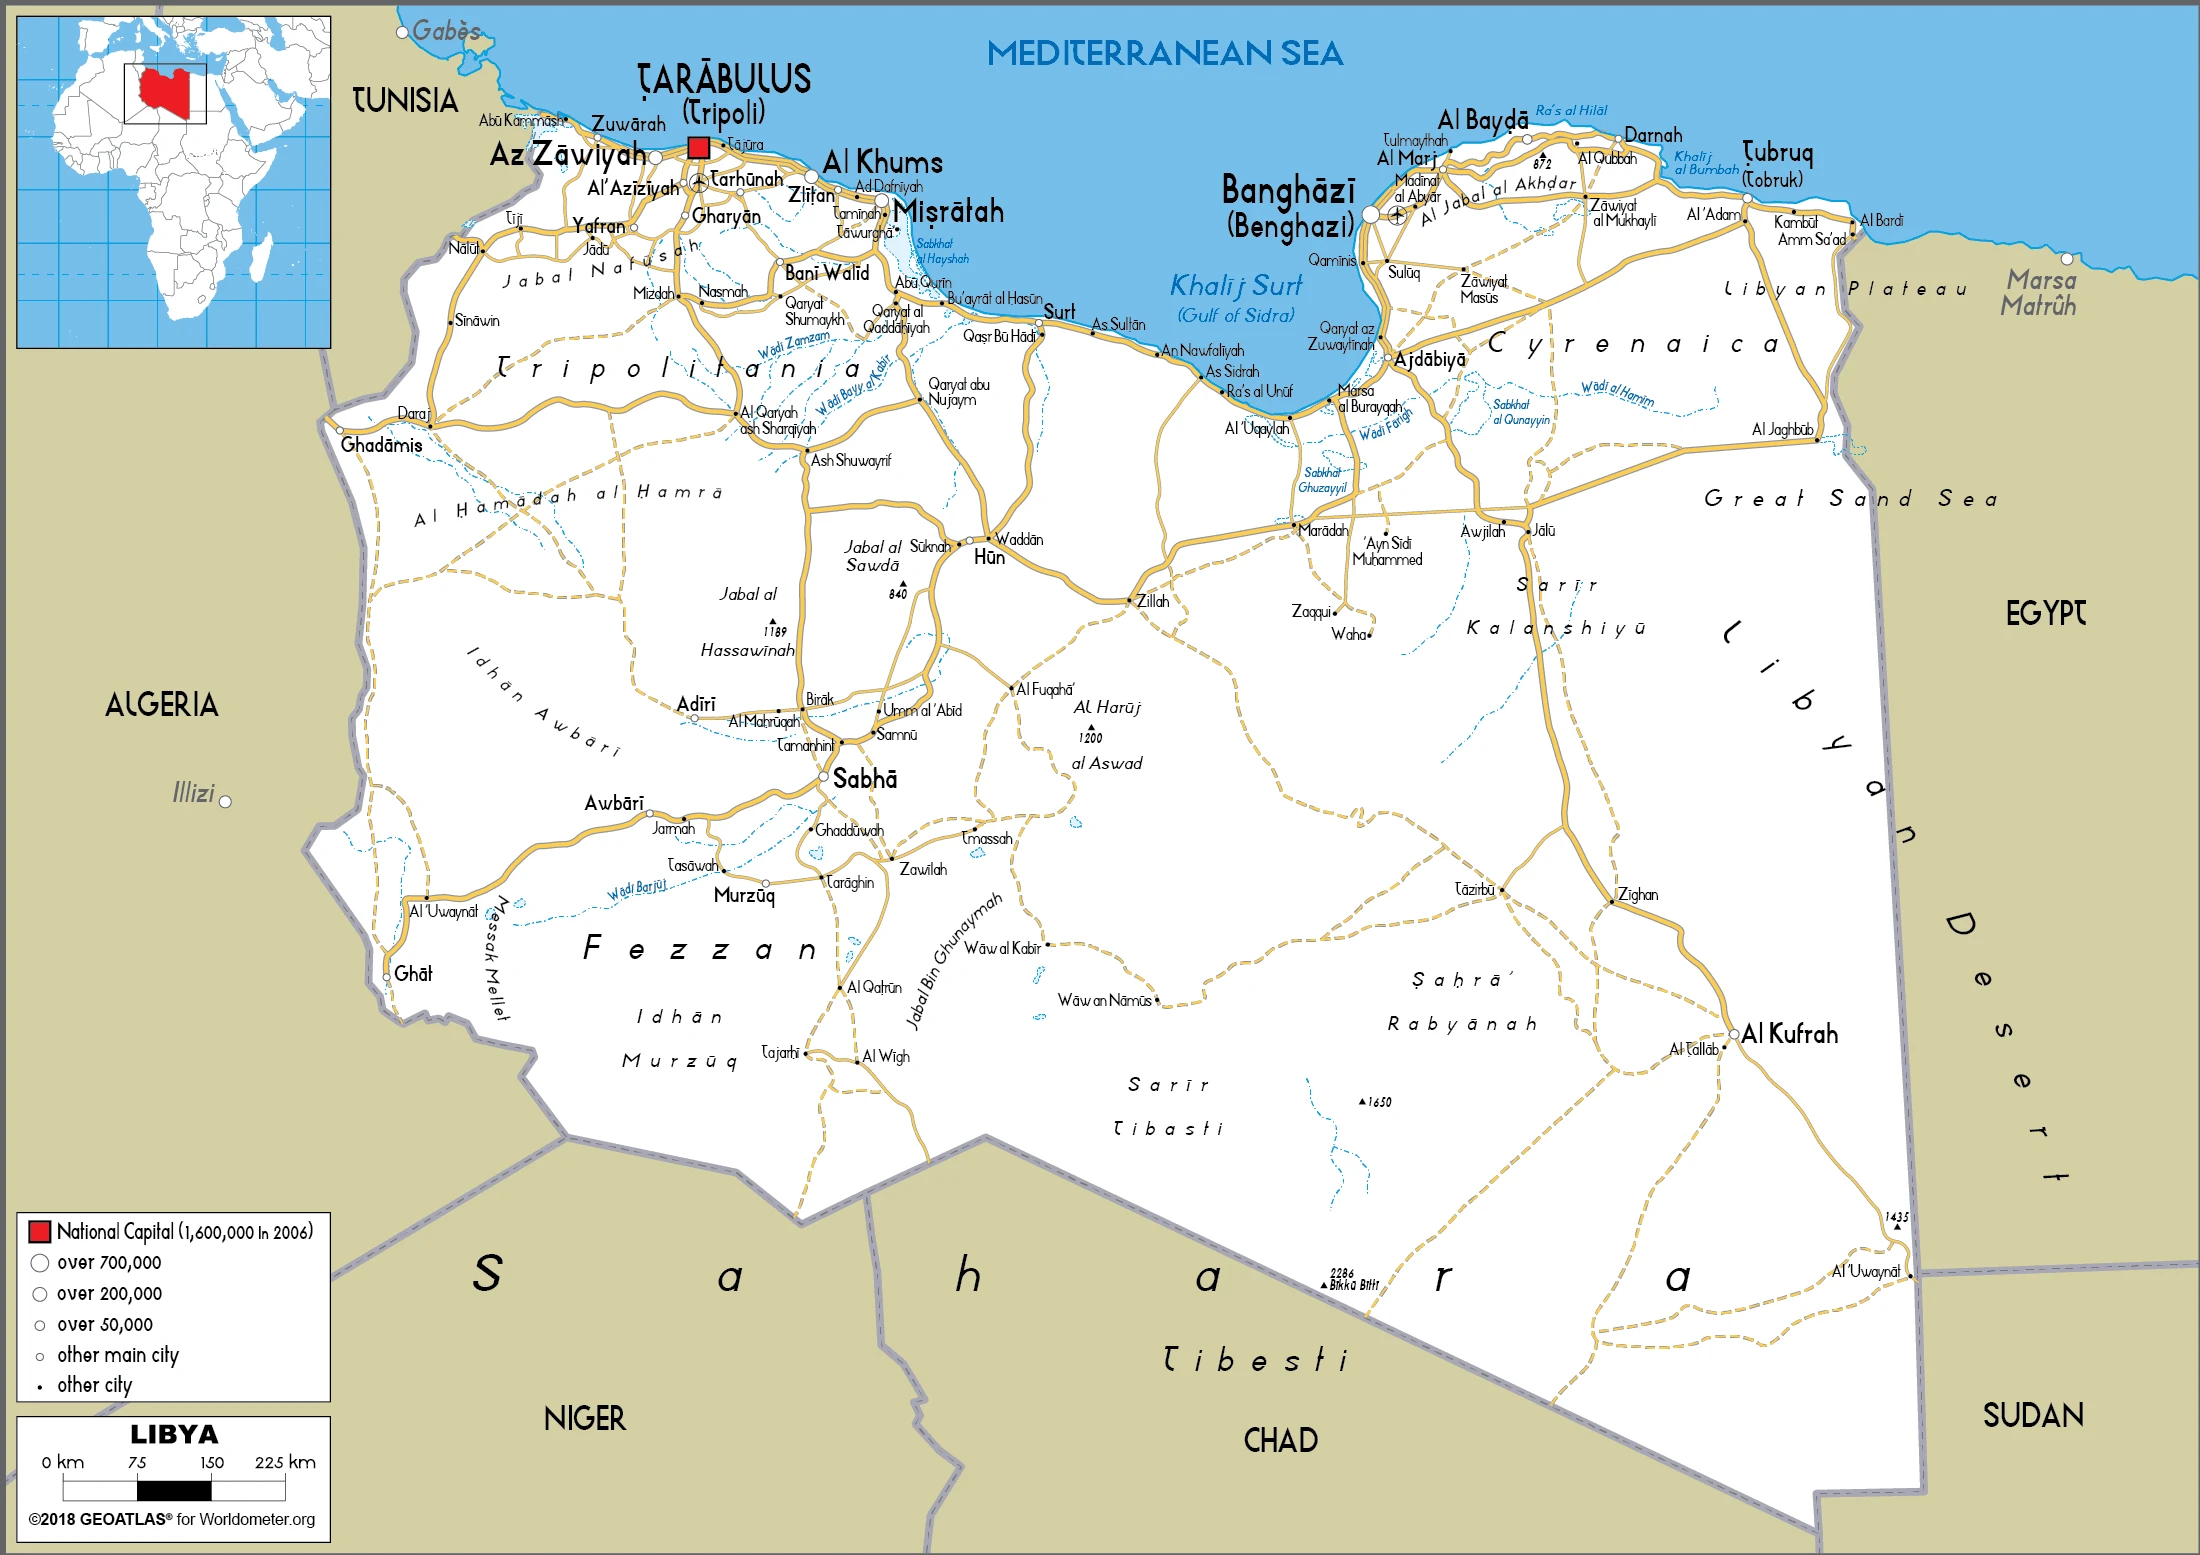 The route plan of the Libyan roadways.